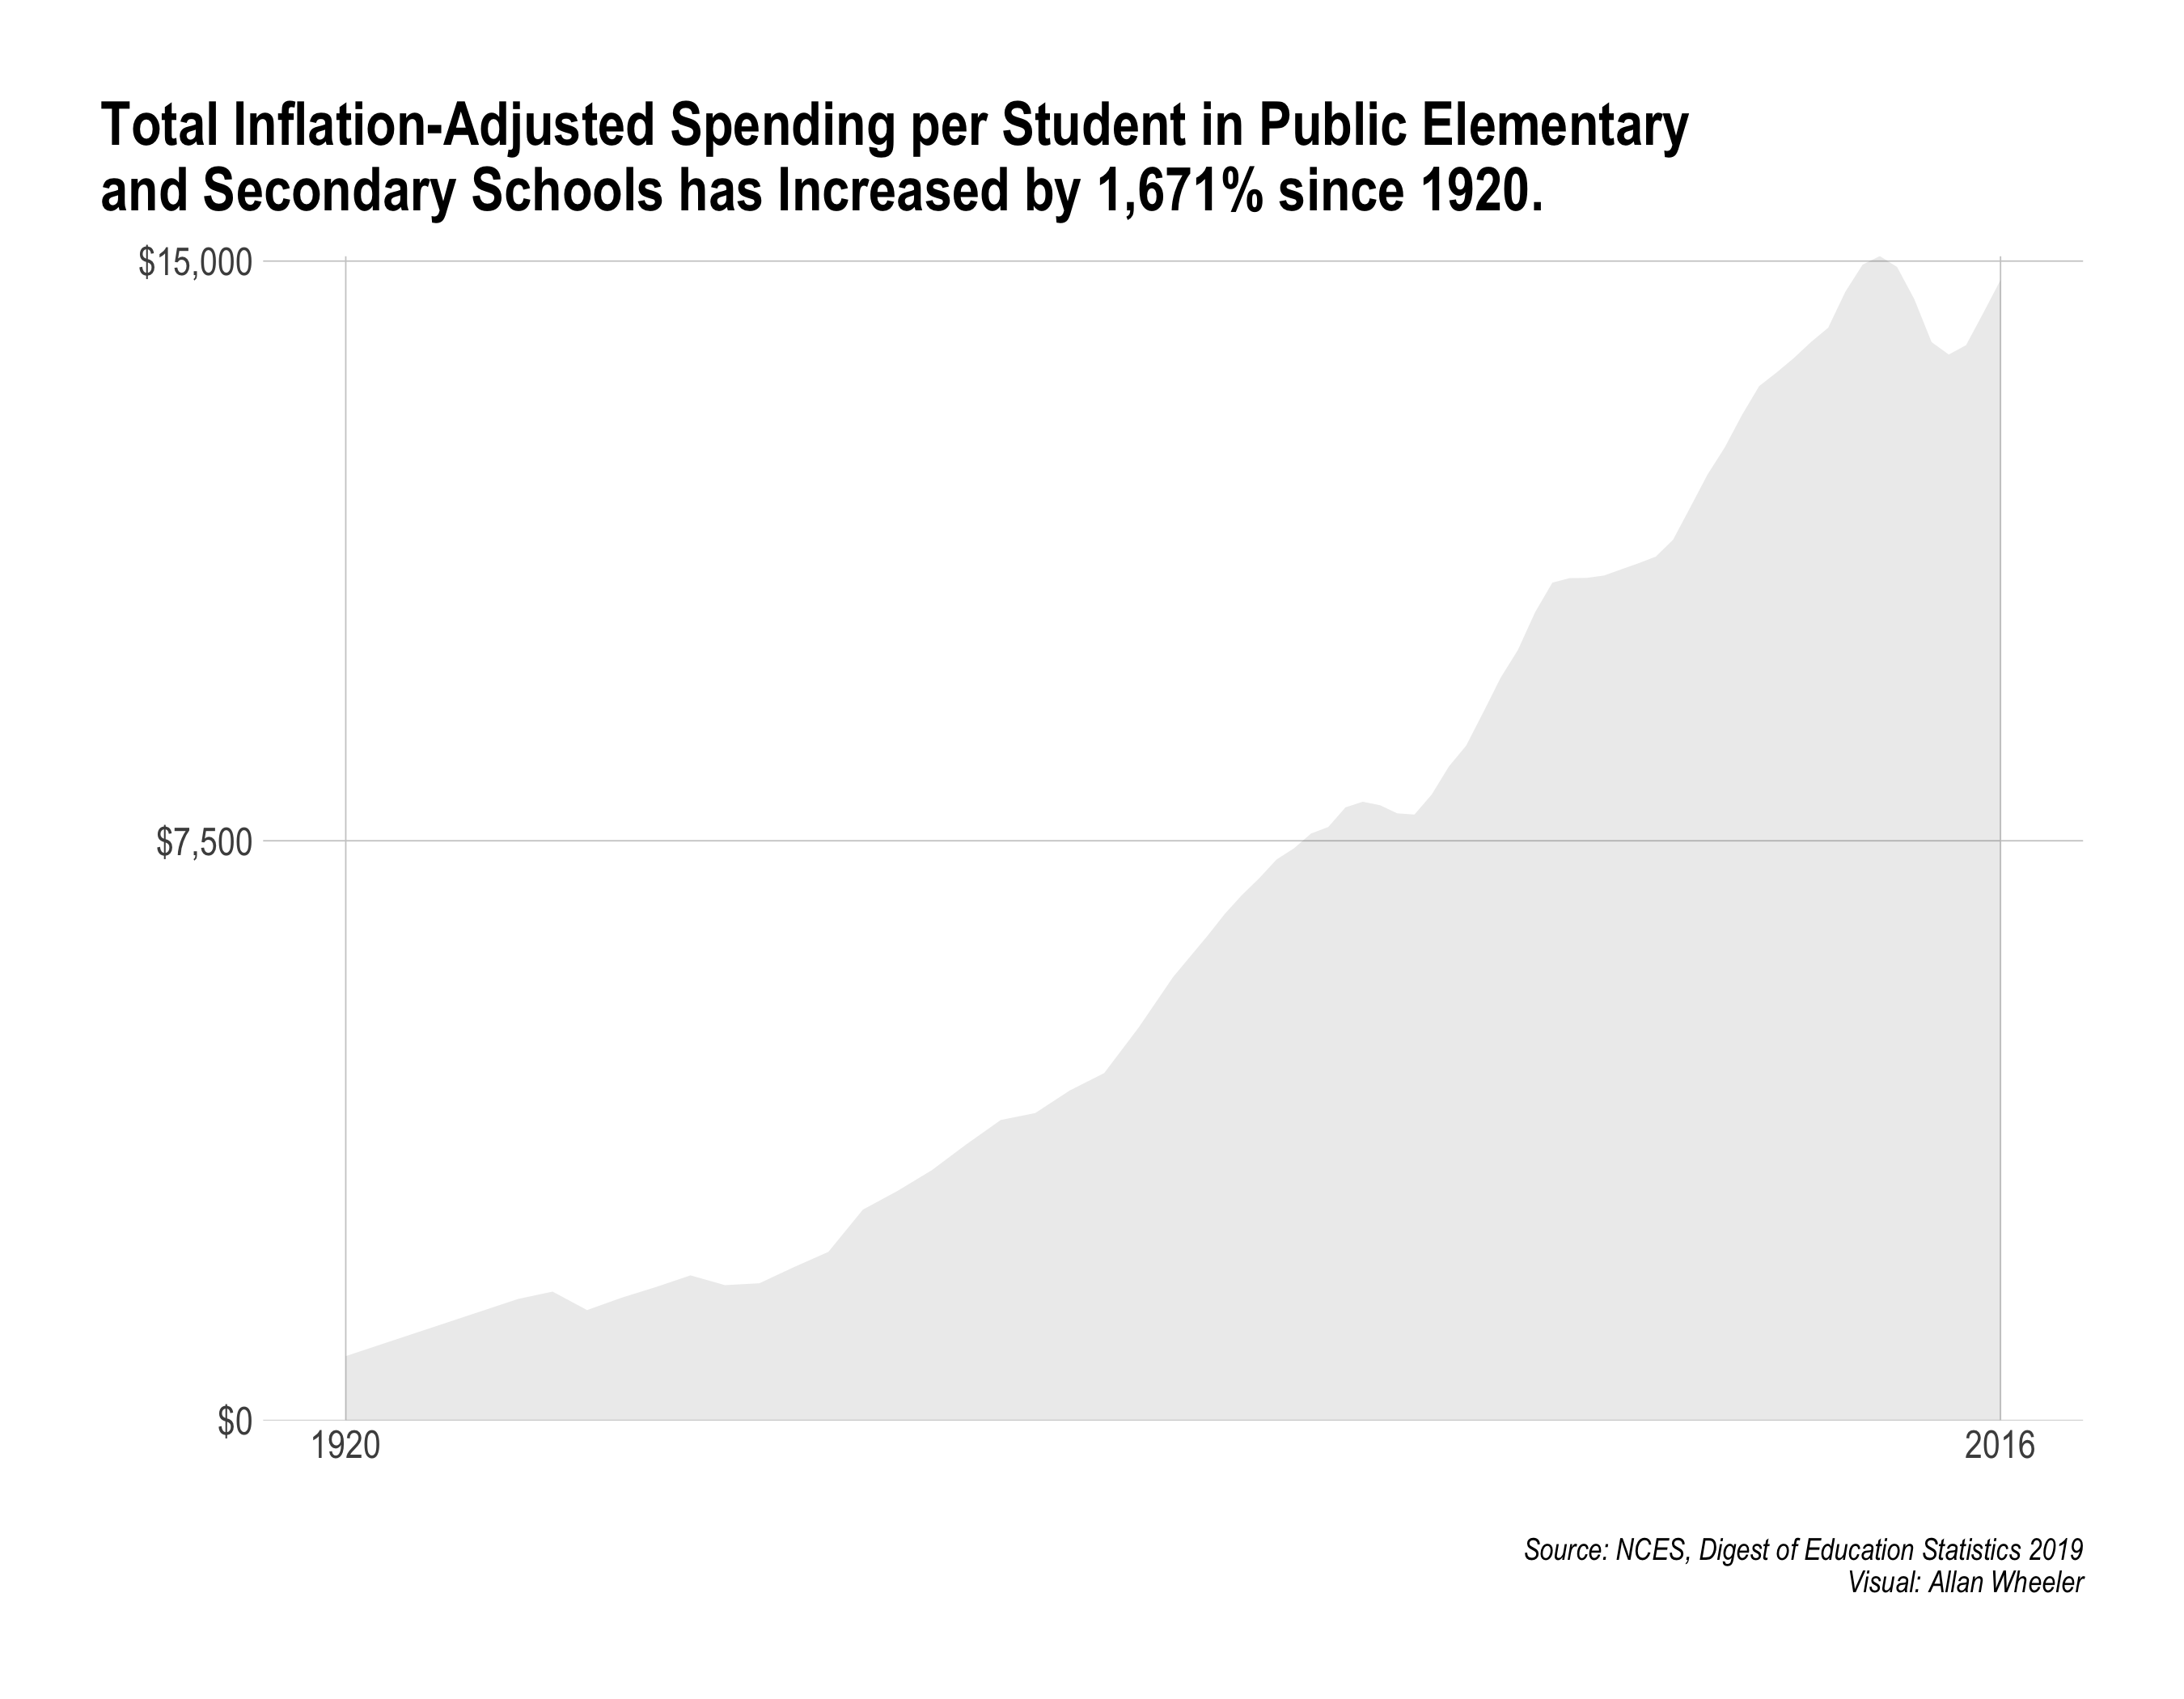 k-12_spending_since_1920.png